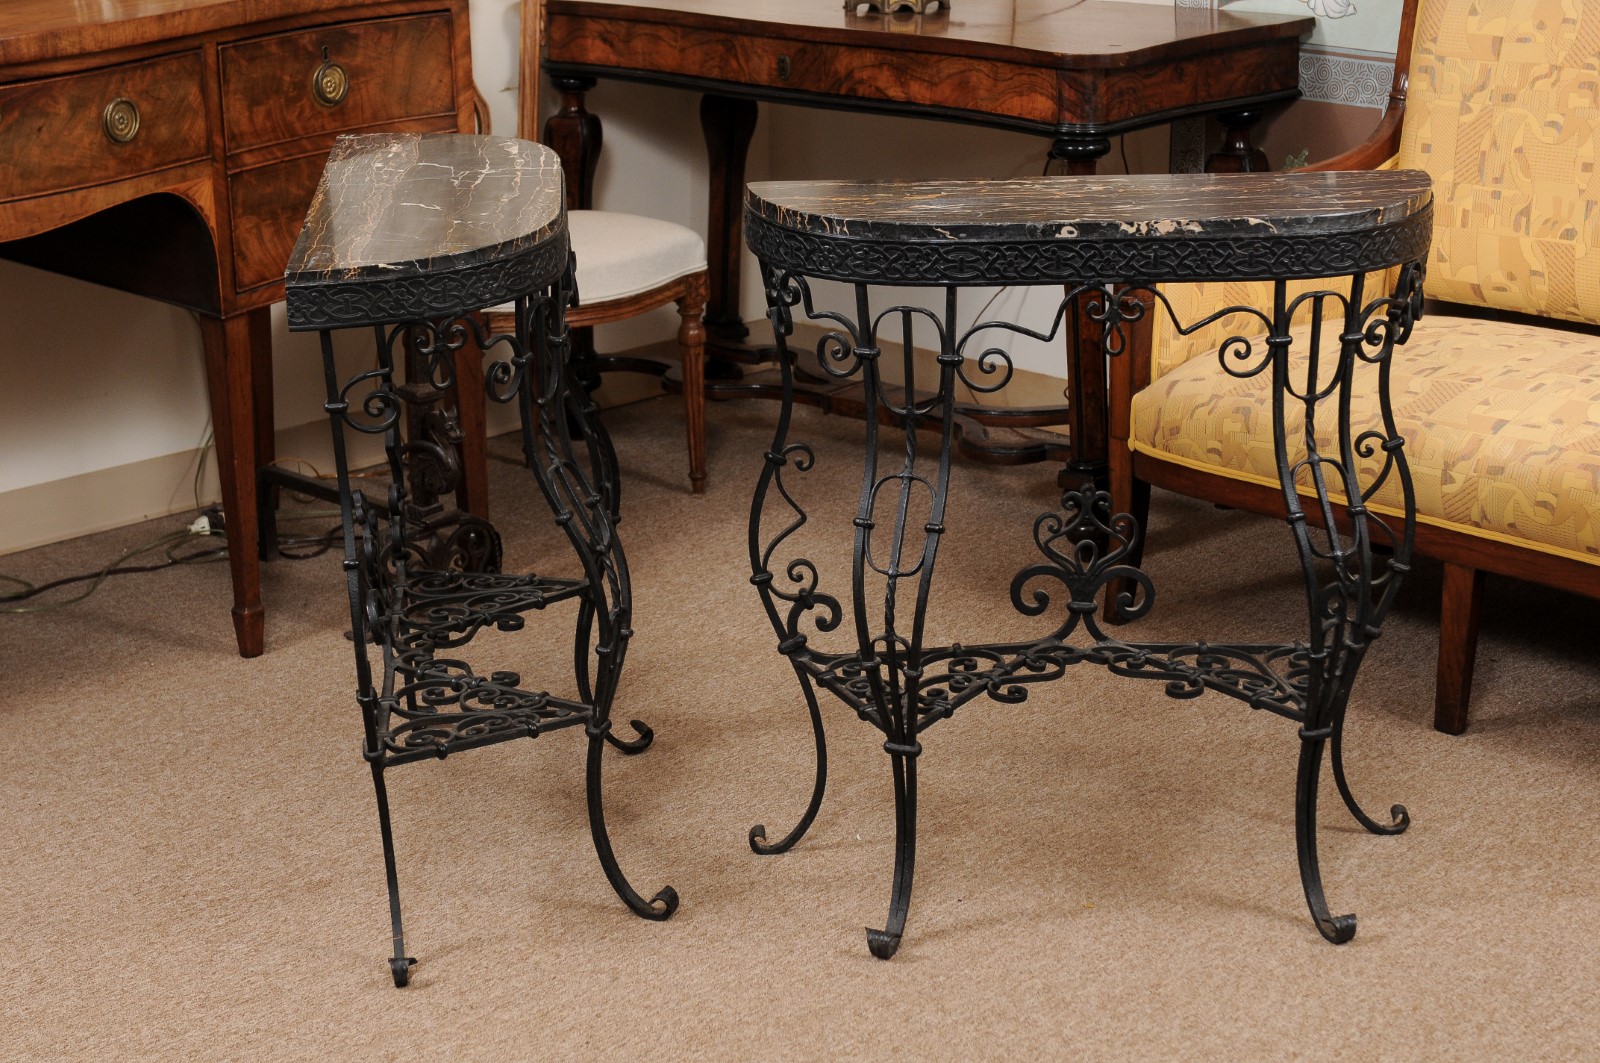 Pair of Iron Console Tables with Cabriole Legs, Scroll Detail, & Black